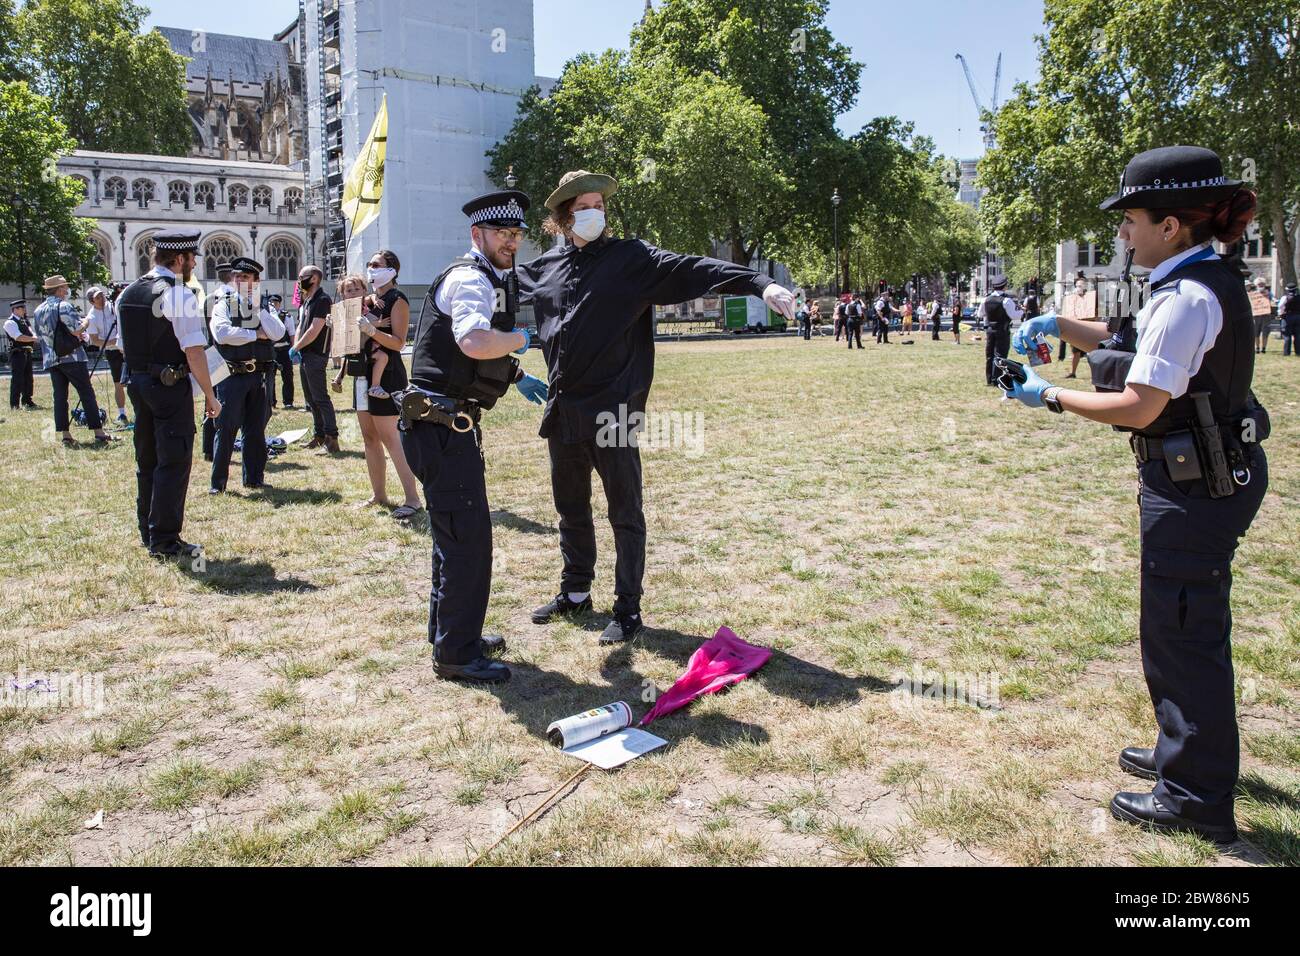 Parliament Square, London, UK. 30 May 2020. A few hundred environmental campaigners from Extinction Rebellion demonstrate peacefully in Parliament Square. Protesters hold placards, demand decisive action from the UK Government on the global environmental crisis. Activists are standing with face masks on and maintain appropriate social distancing. Police questions individual campaigners prompting them to move on; some are body searched and arrests follow for breach of Covid-19 regulations. Stock Photo